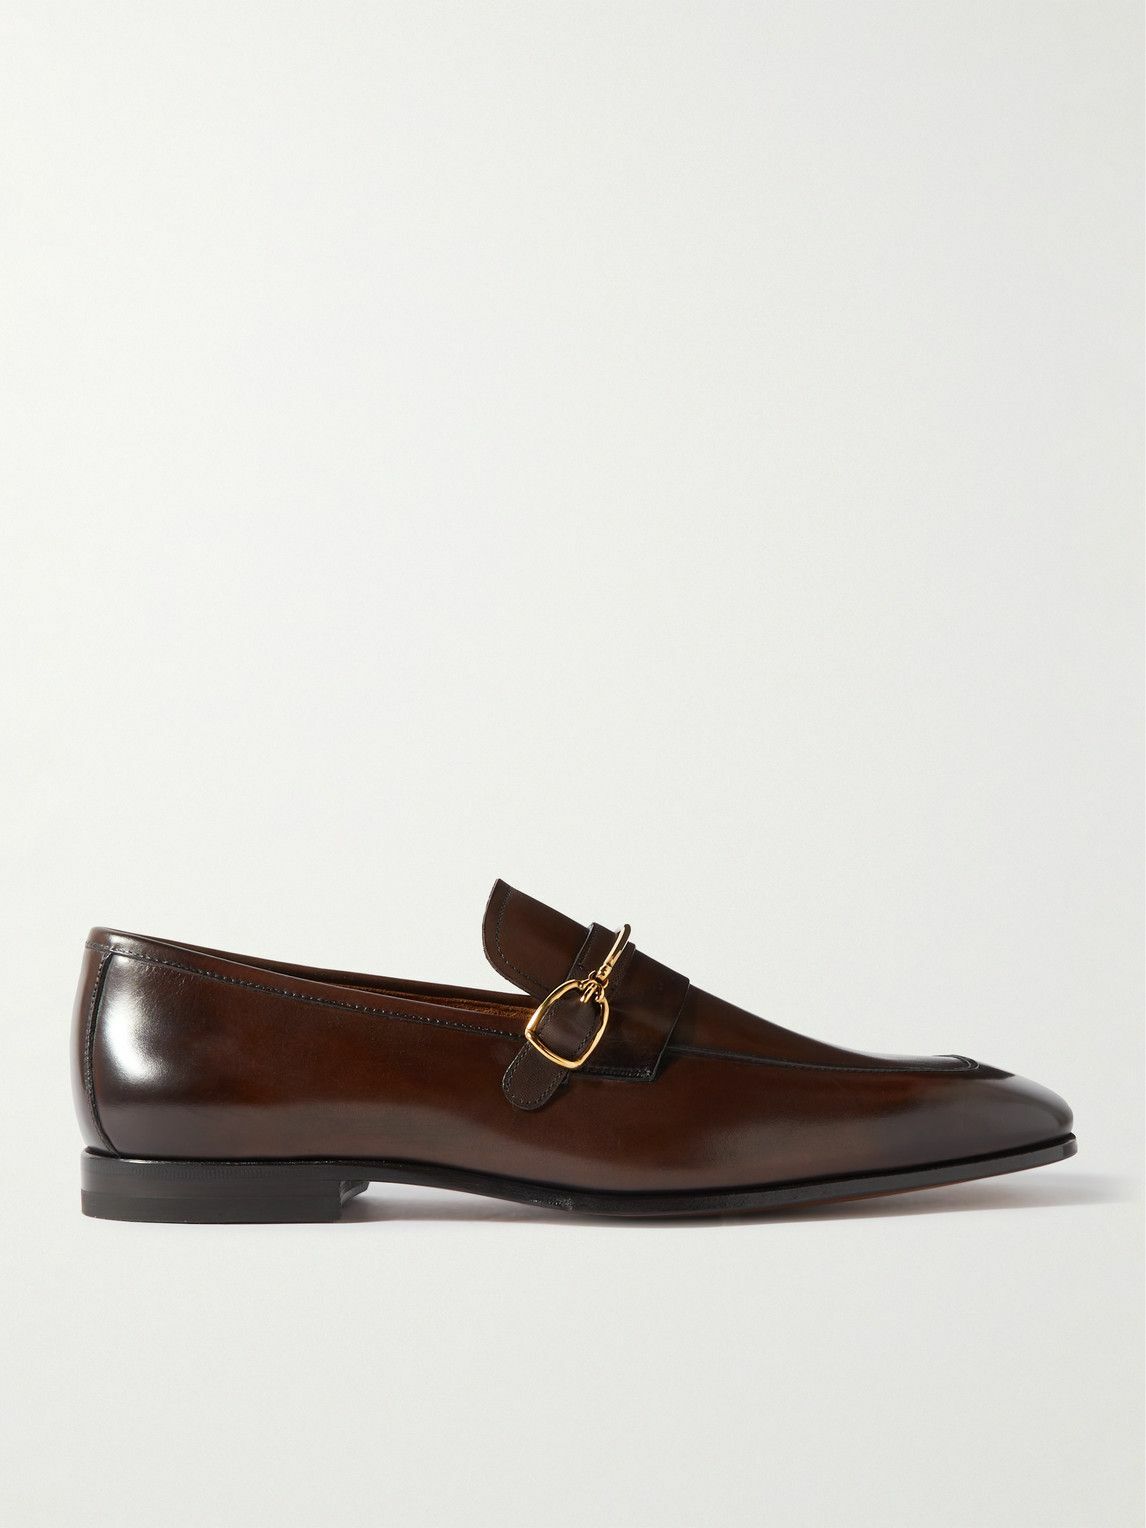 TOM FORD - Jack Embellished Patent-Leather Loafers - Brown TOM FORD